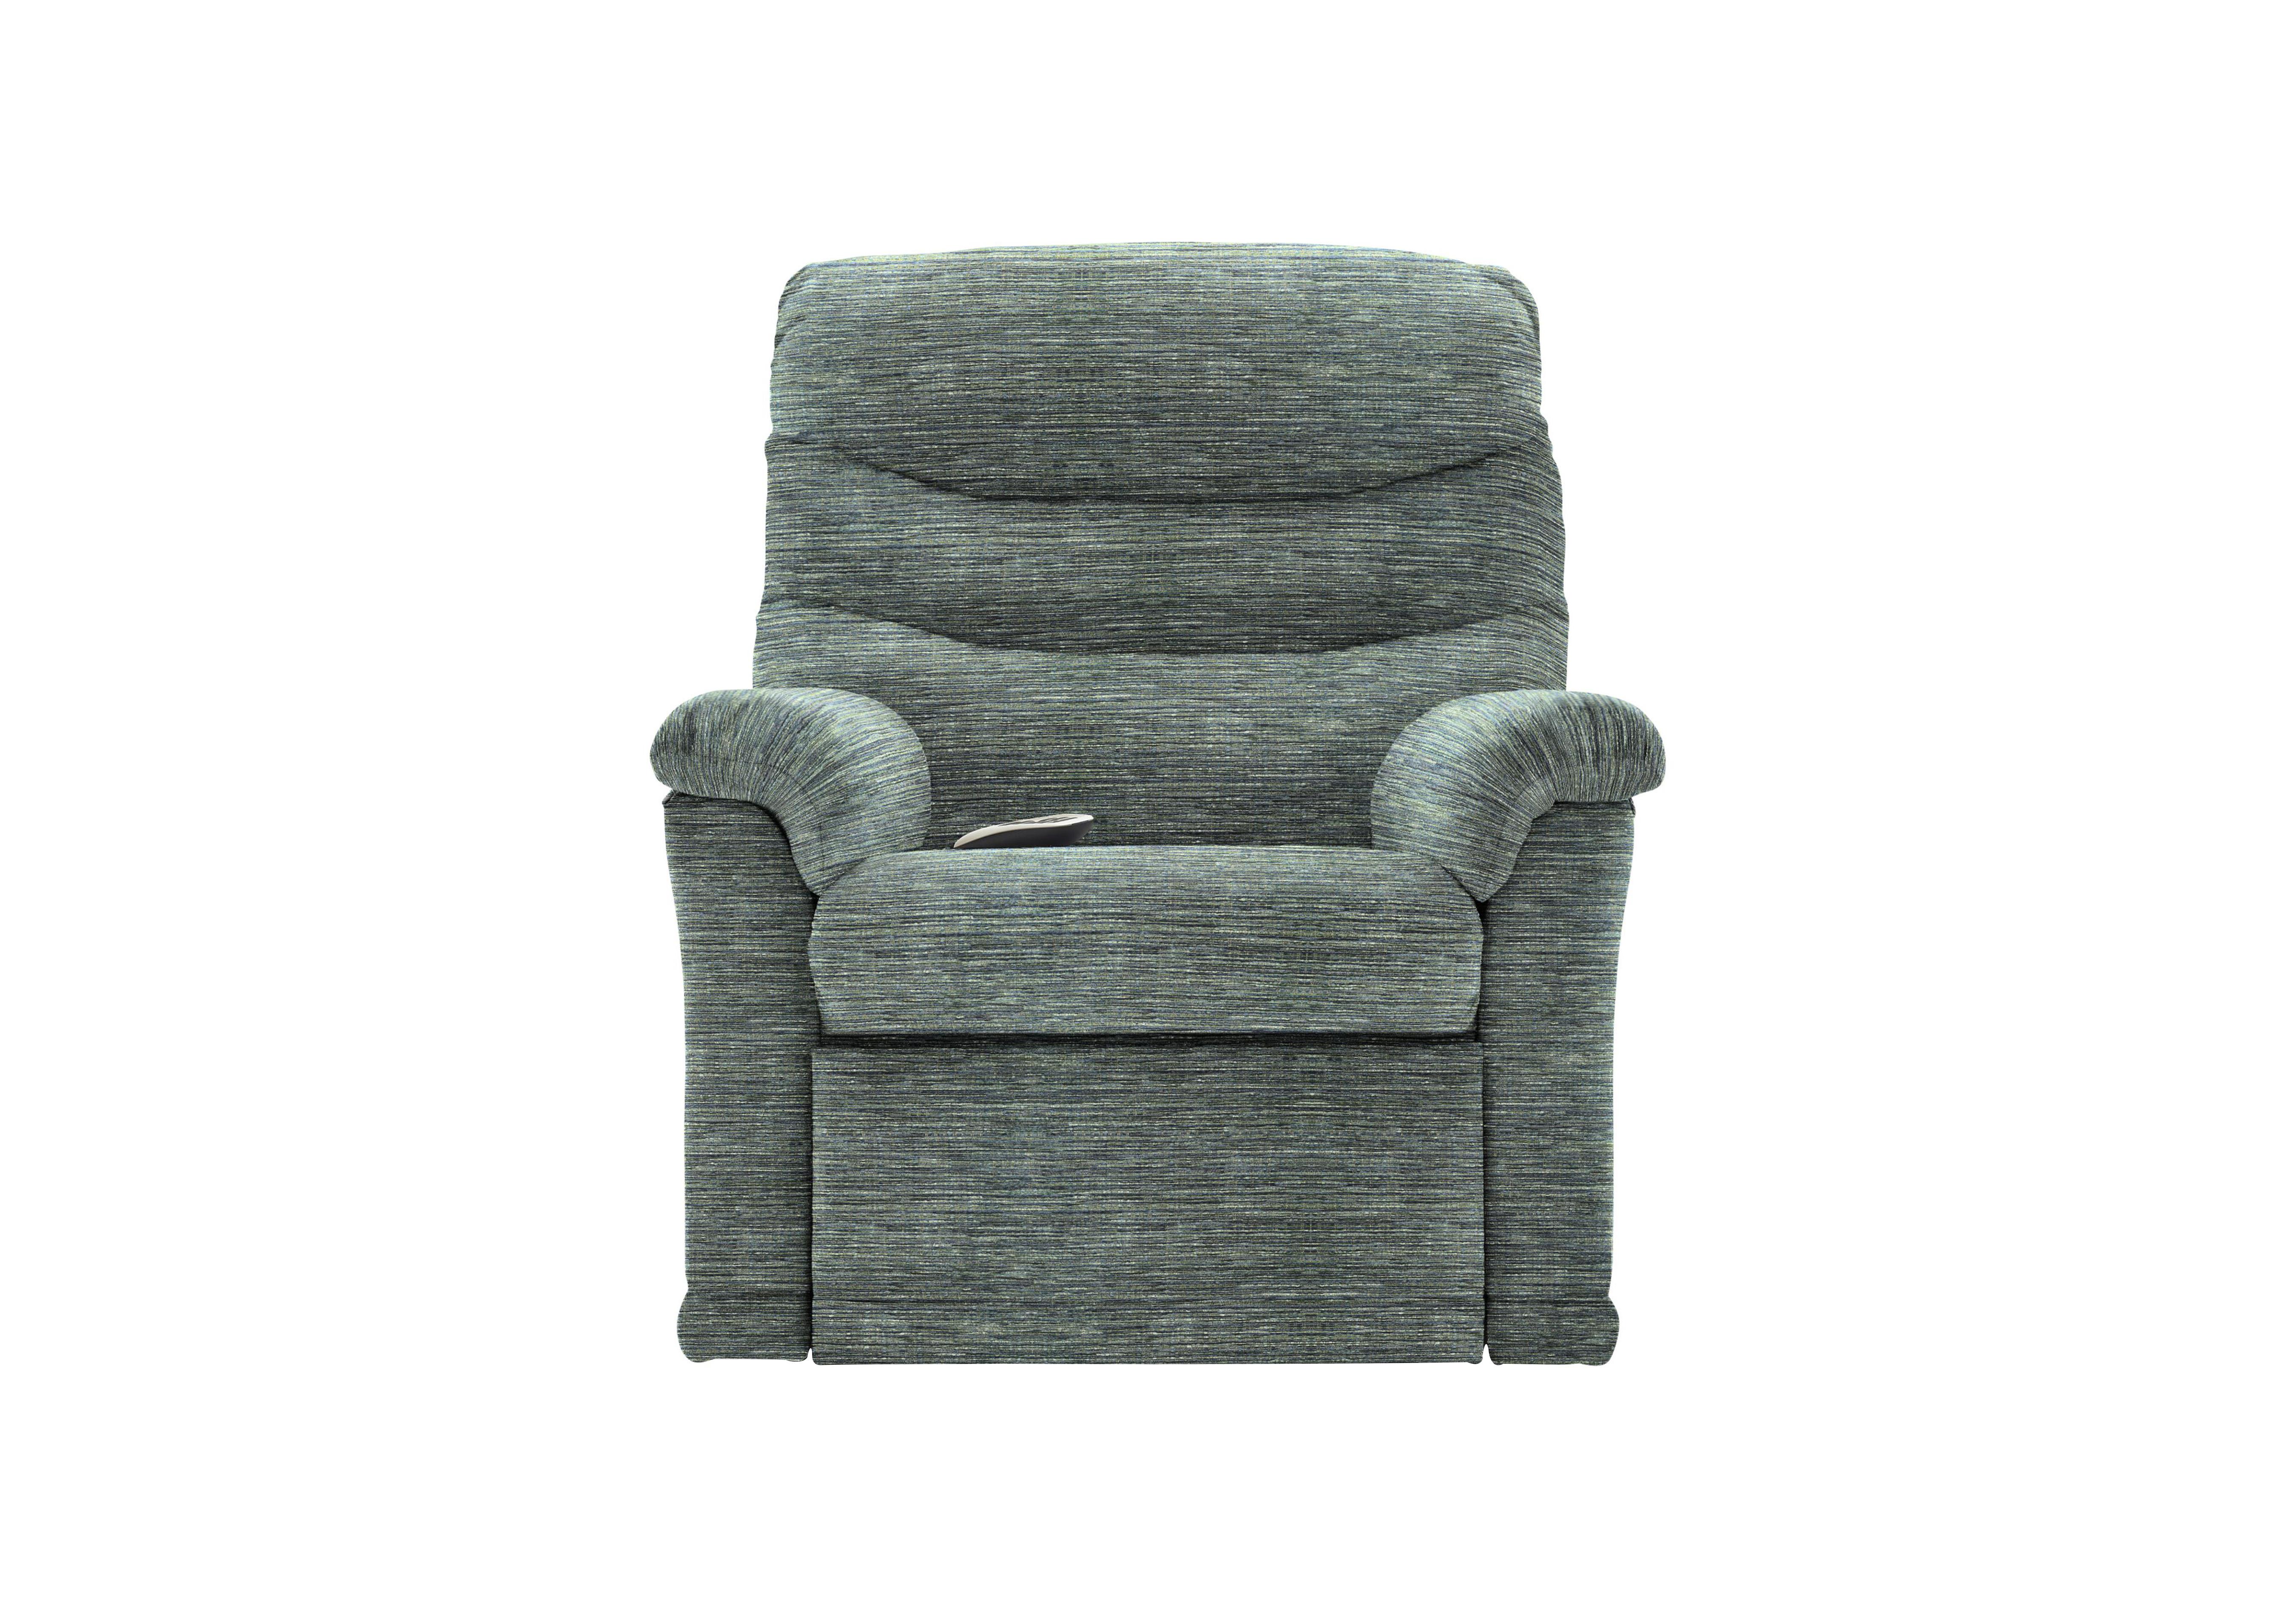 Malvern Fabric Rise and Recline Armchair in B925 Waffle Marine on Furniture Village